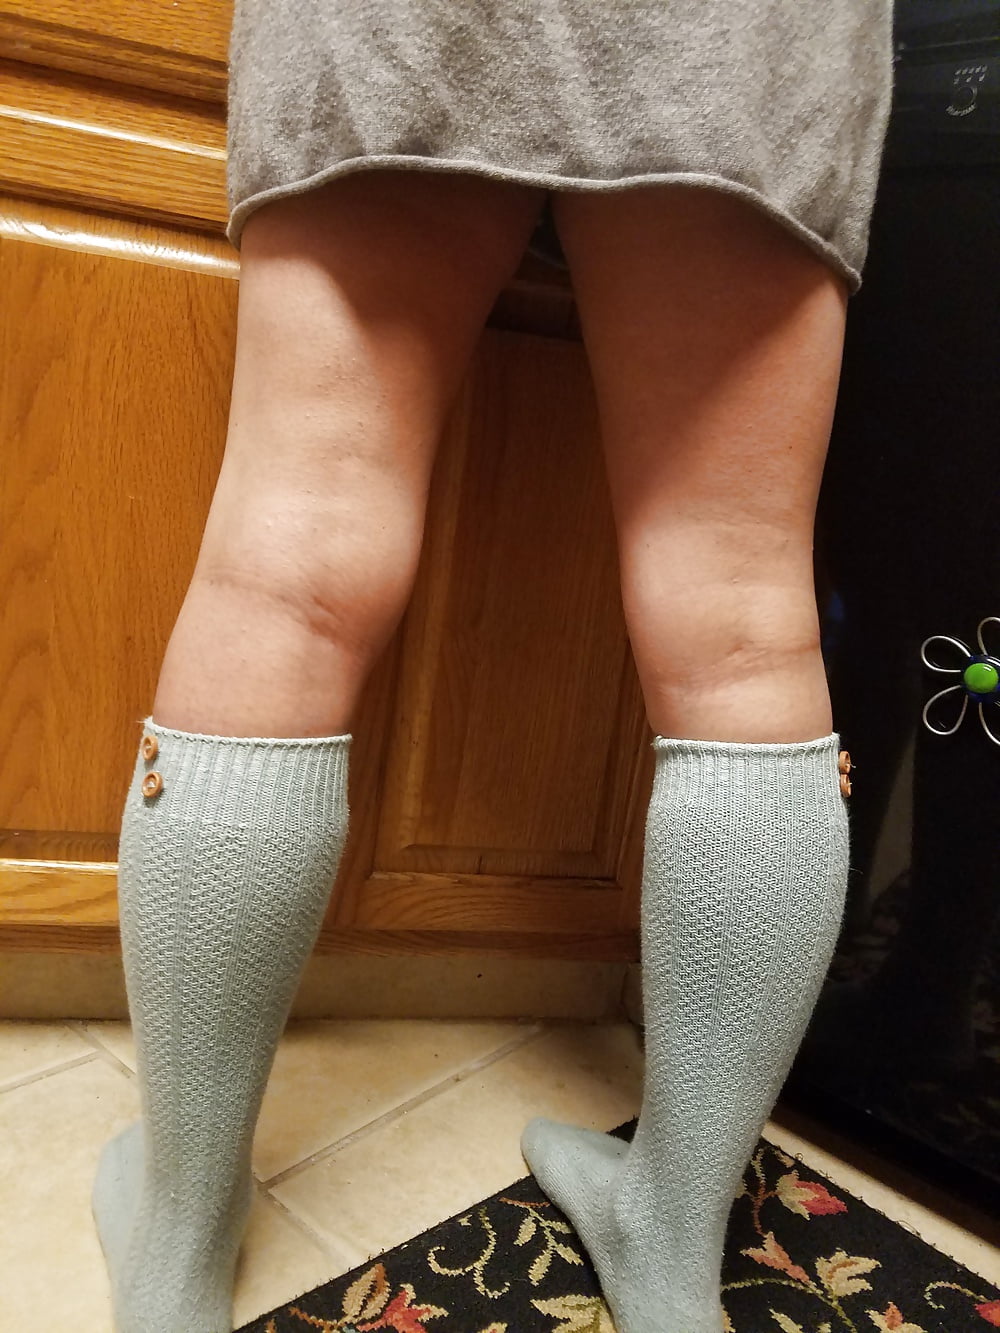 Sex Gallery Wife unaware socks and upskirt